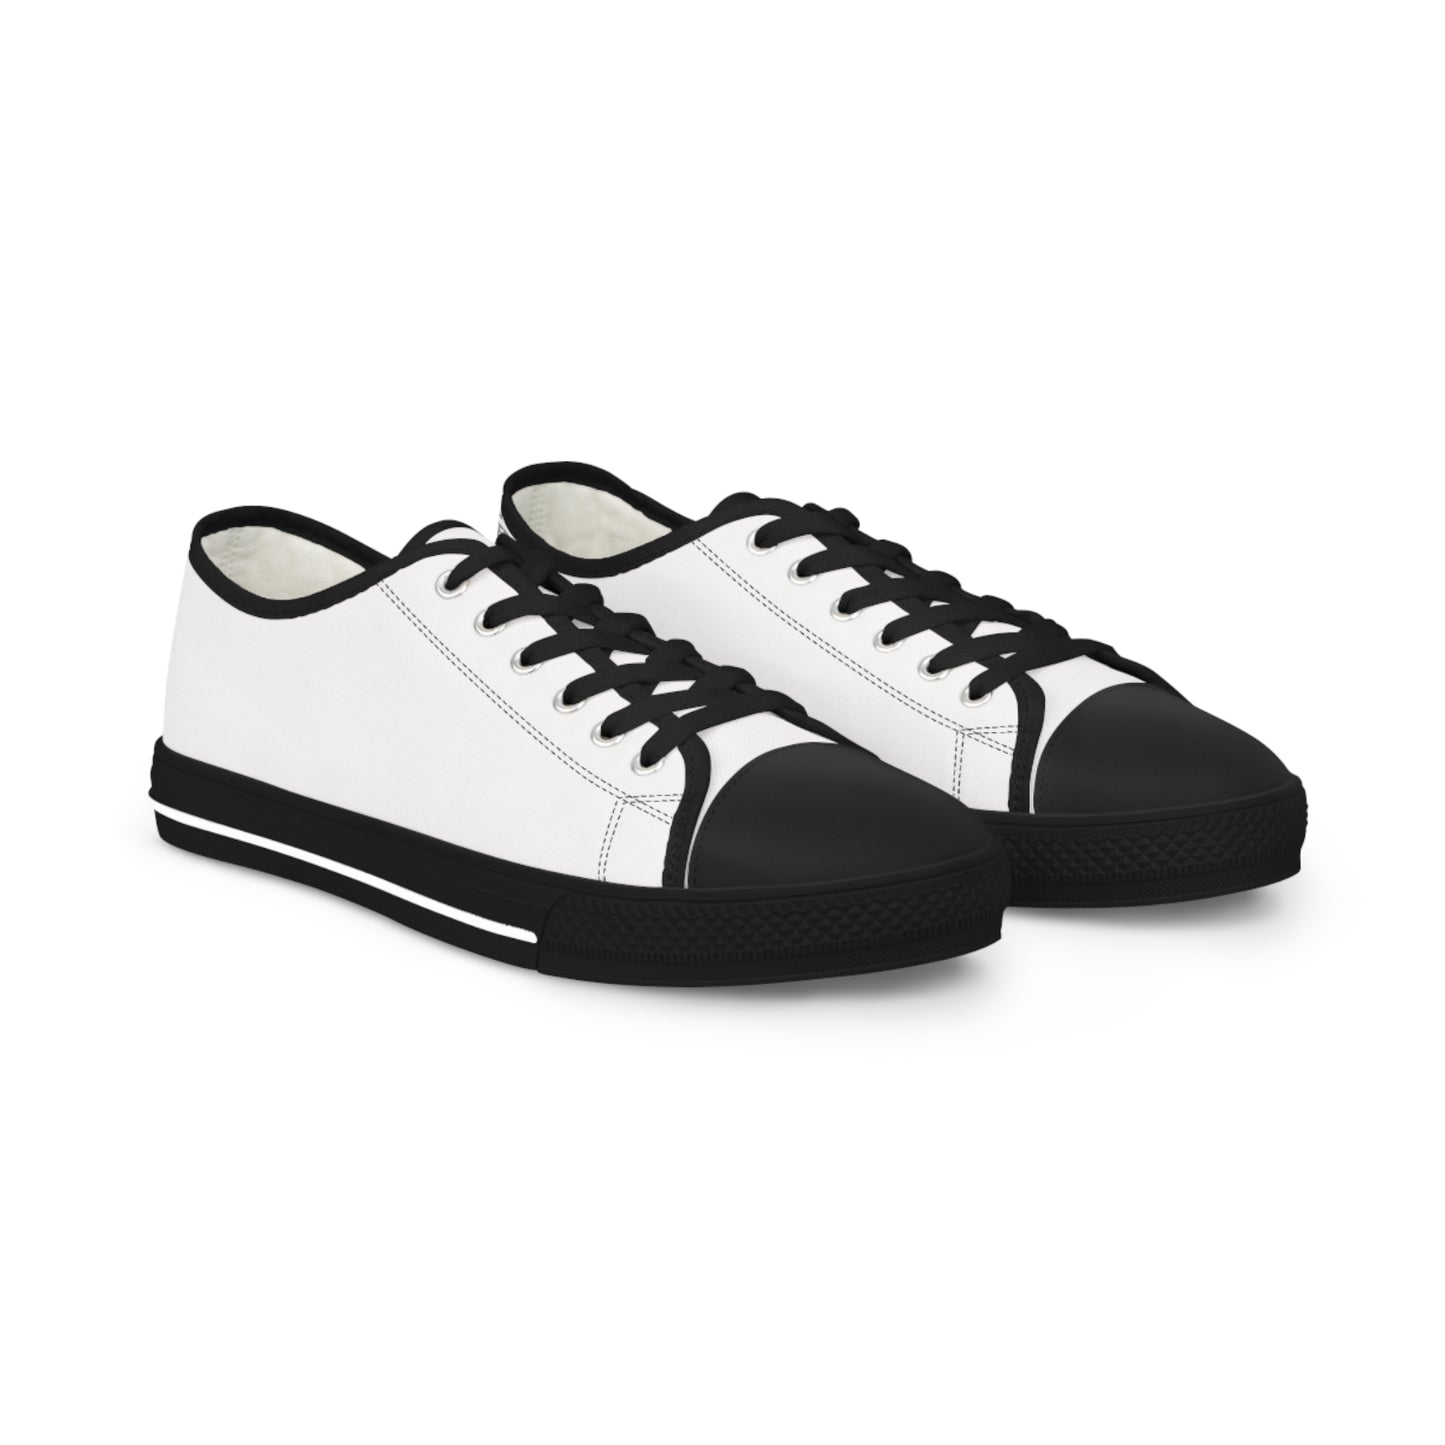 Refs Need Love Too Men's Low Top Sneakers | Amazing gift for Refs | Minimalist Design | For sports officials | Great Christmas Gift for Referees | US Sizes 5-14 | White or White/Black